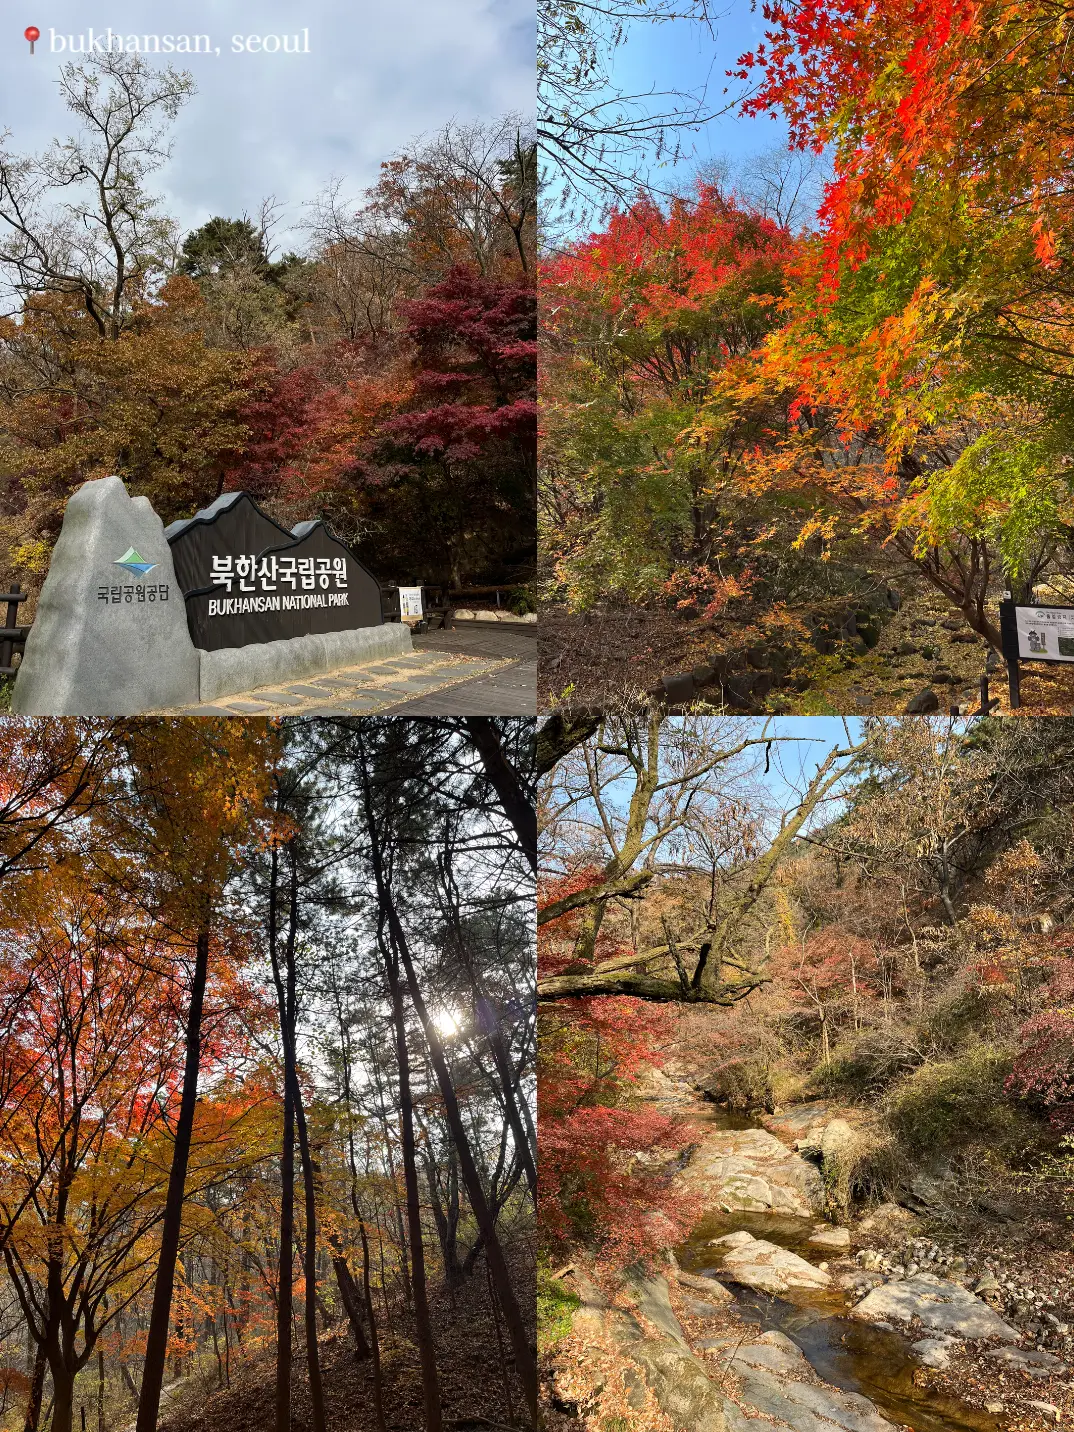 3 MOUNTAINS IVE CONQUERED IN 🇰🇷!!'s images(3)